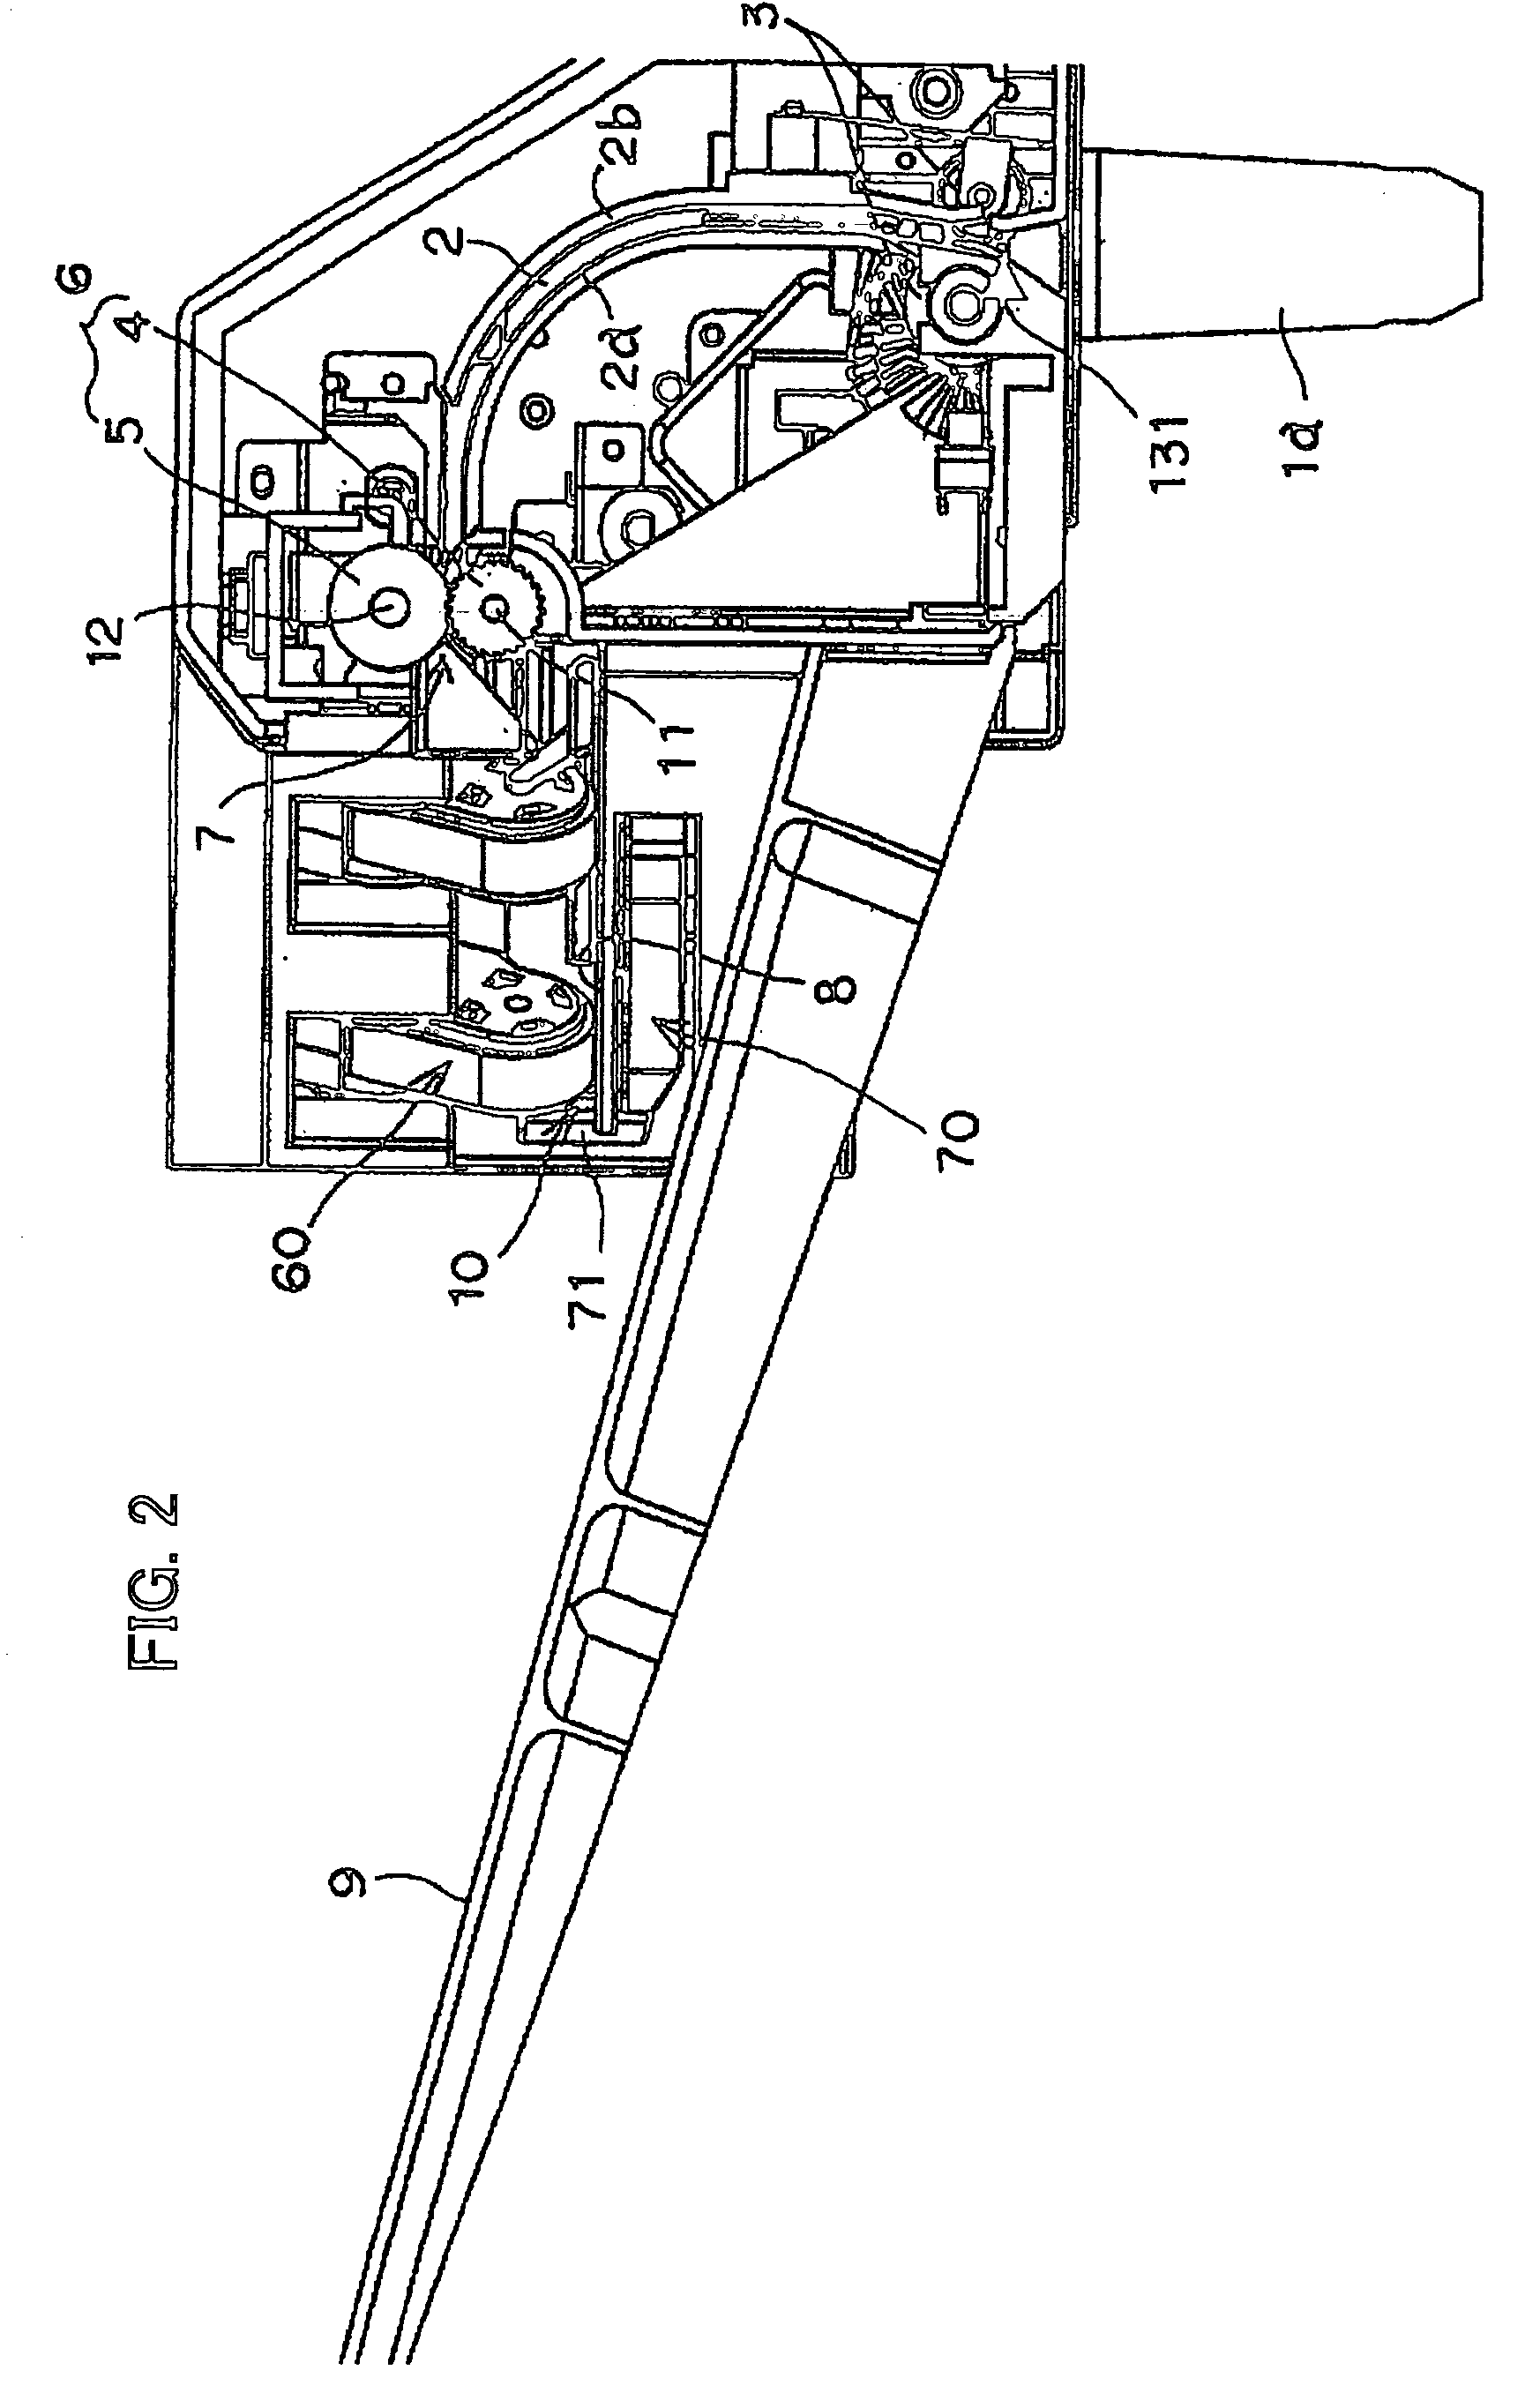 Sheet discharge apparatus with aligning member